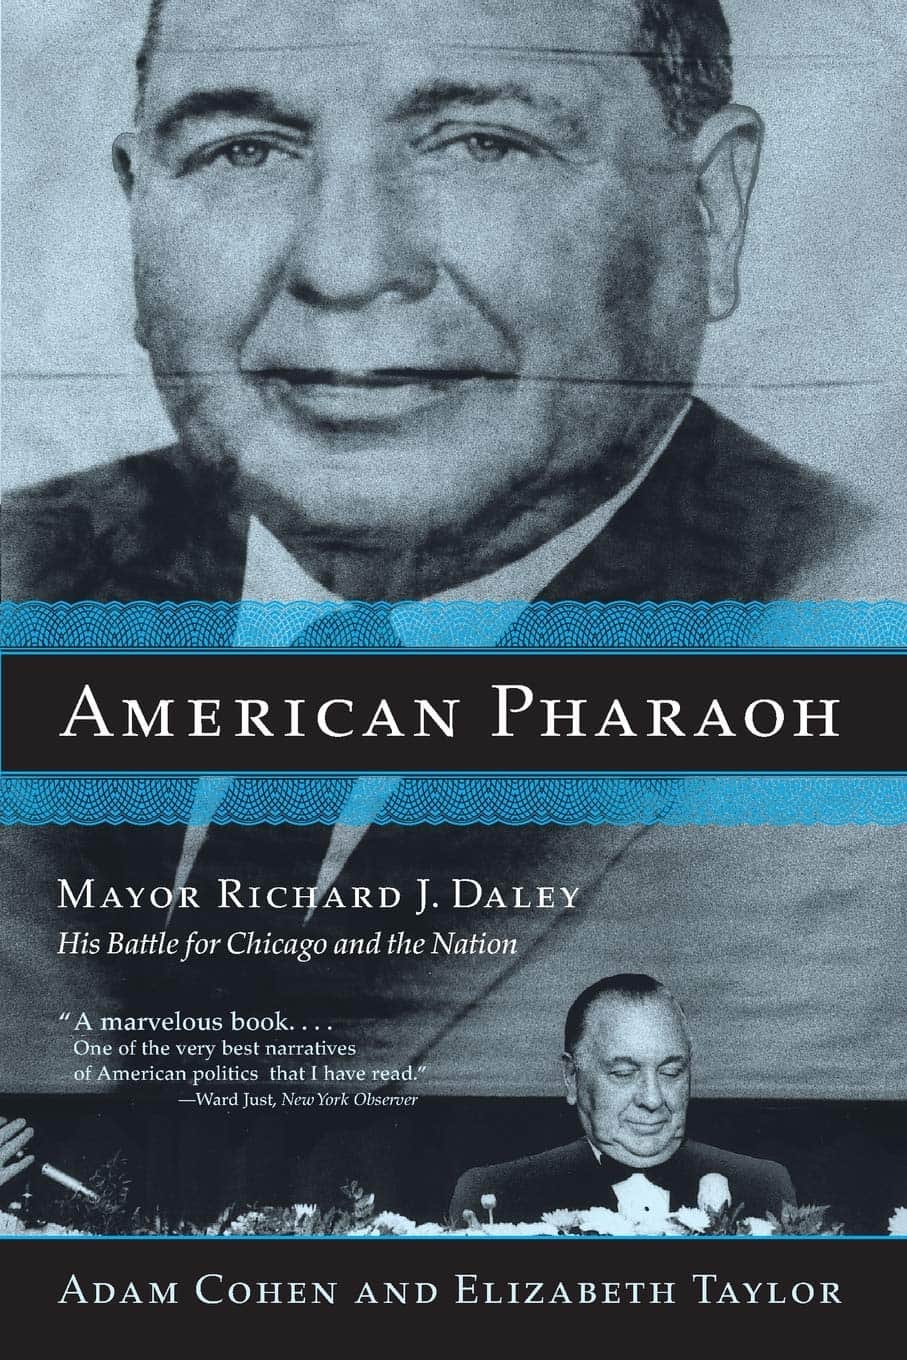 American Pharaoh Mayor Richard J. Daley – His Battle for Chicago and the Nation (2001)